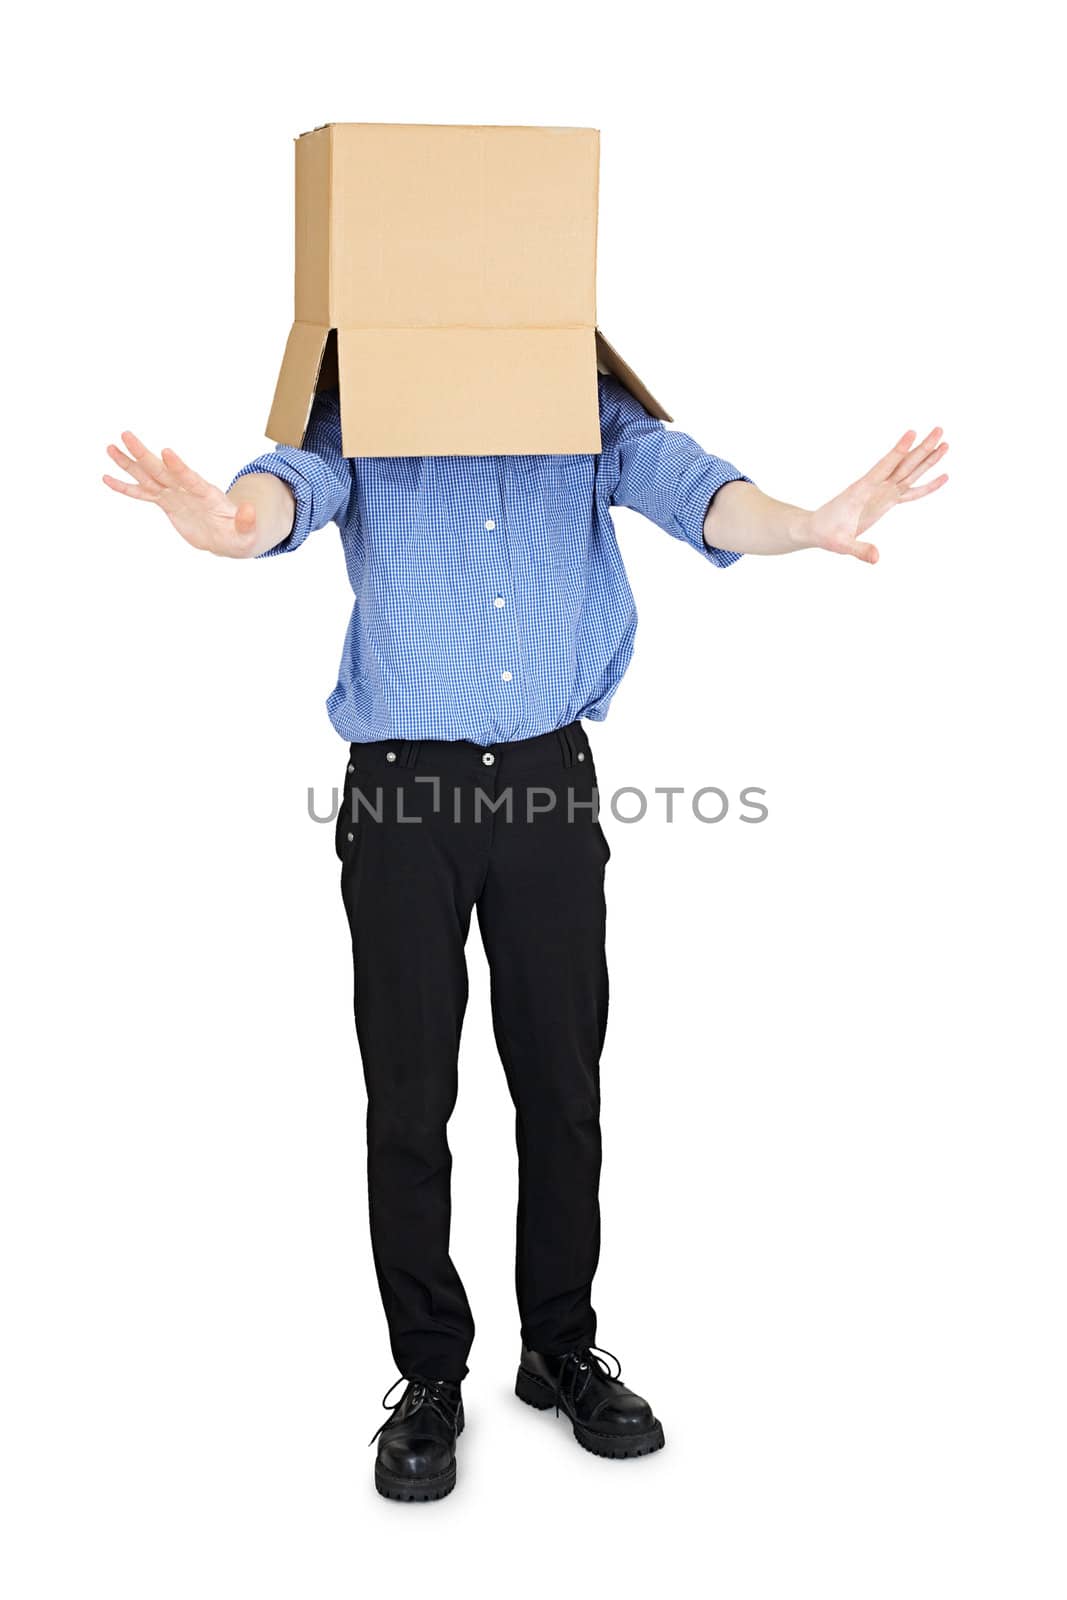 Man blinded by the box to put on his head